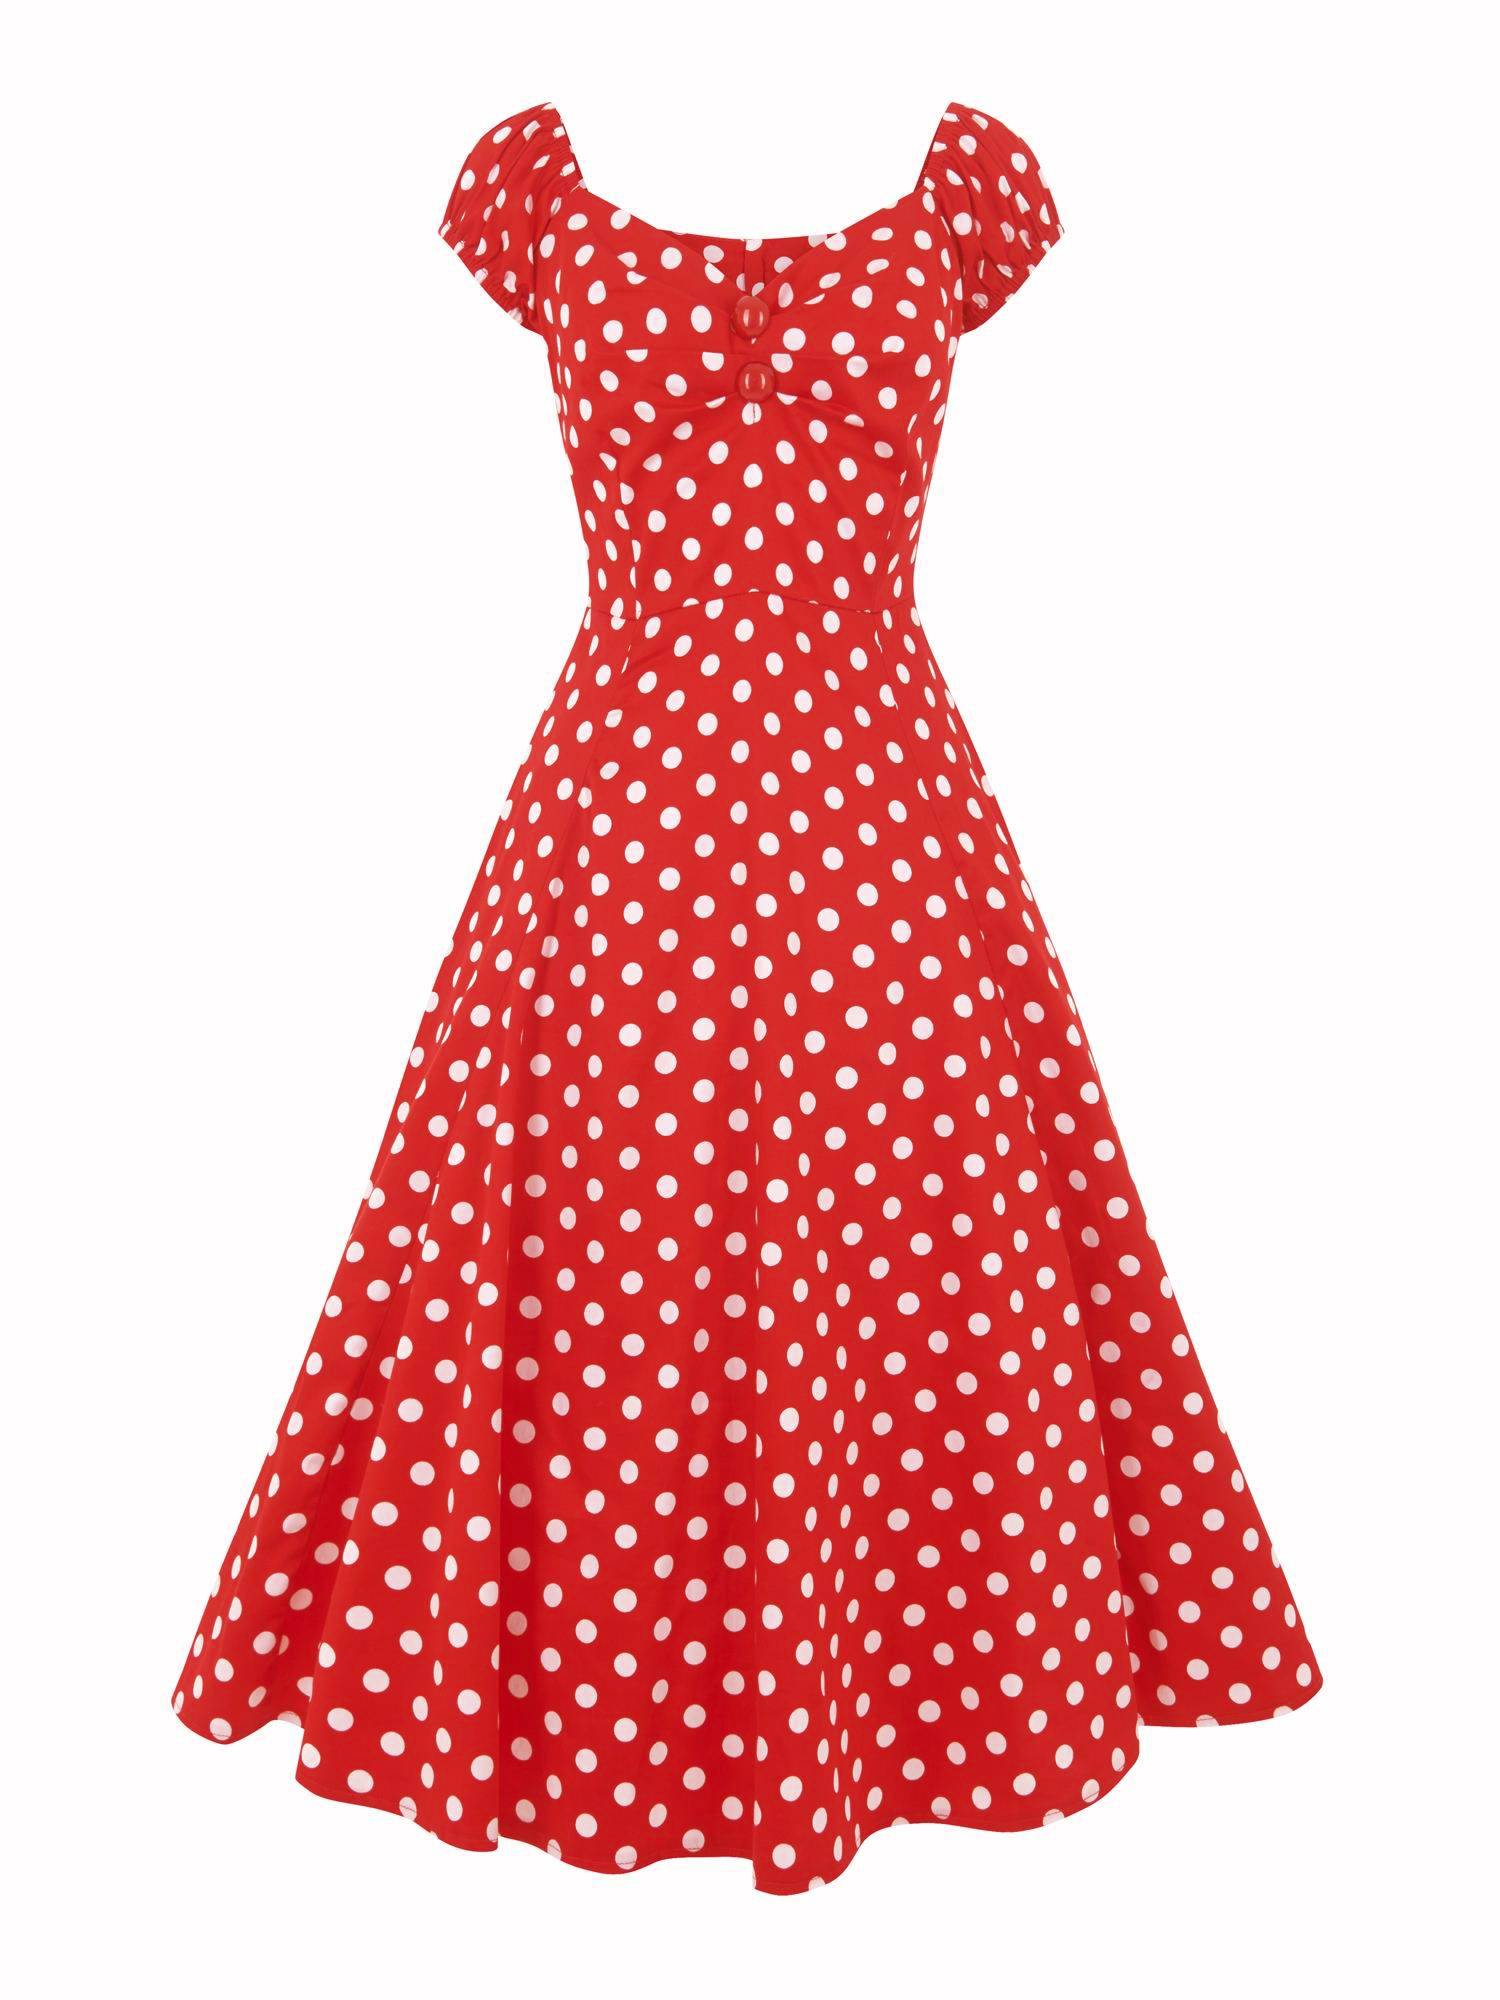 Collectif Kleid Dolores Doll Dress Polka rot-weiß